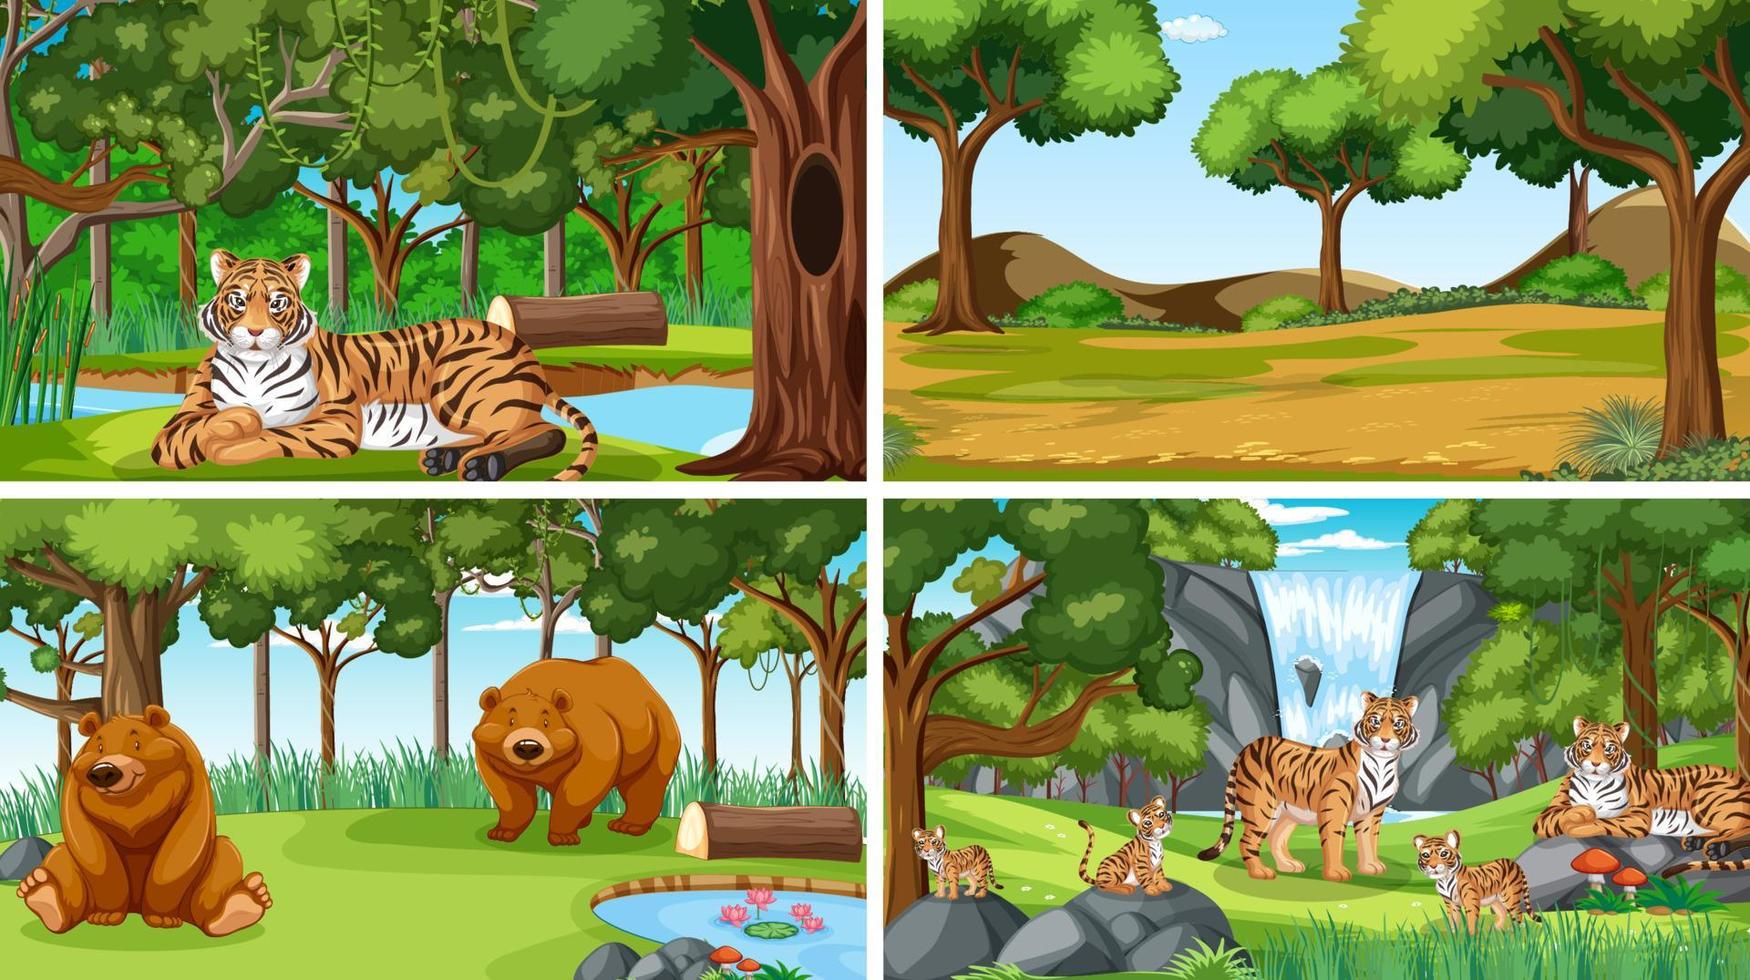 Different forest scenes with wild animals vector